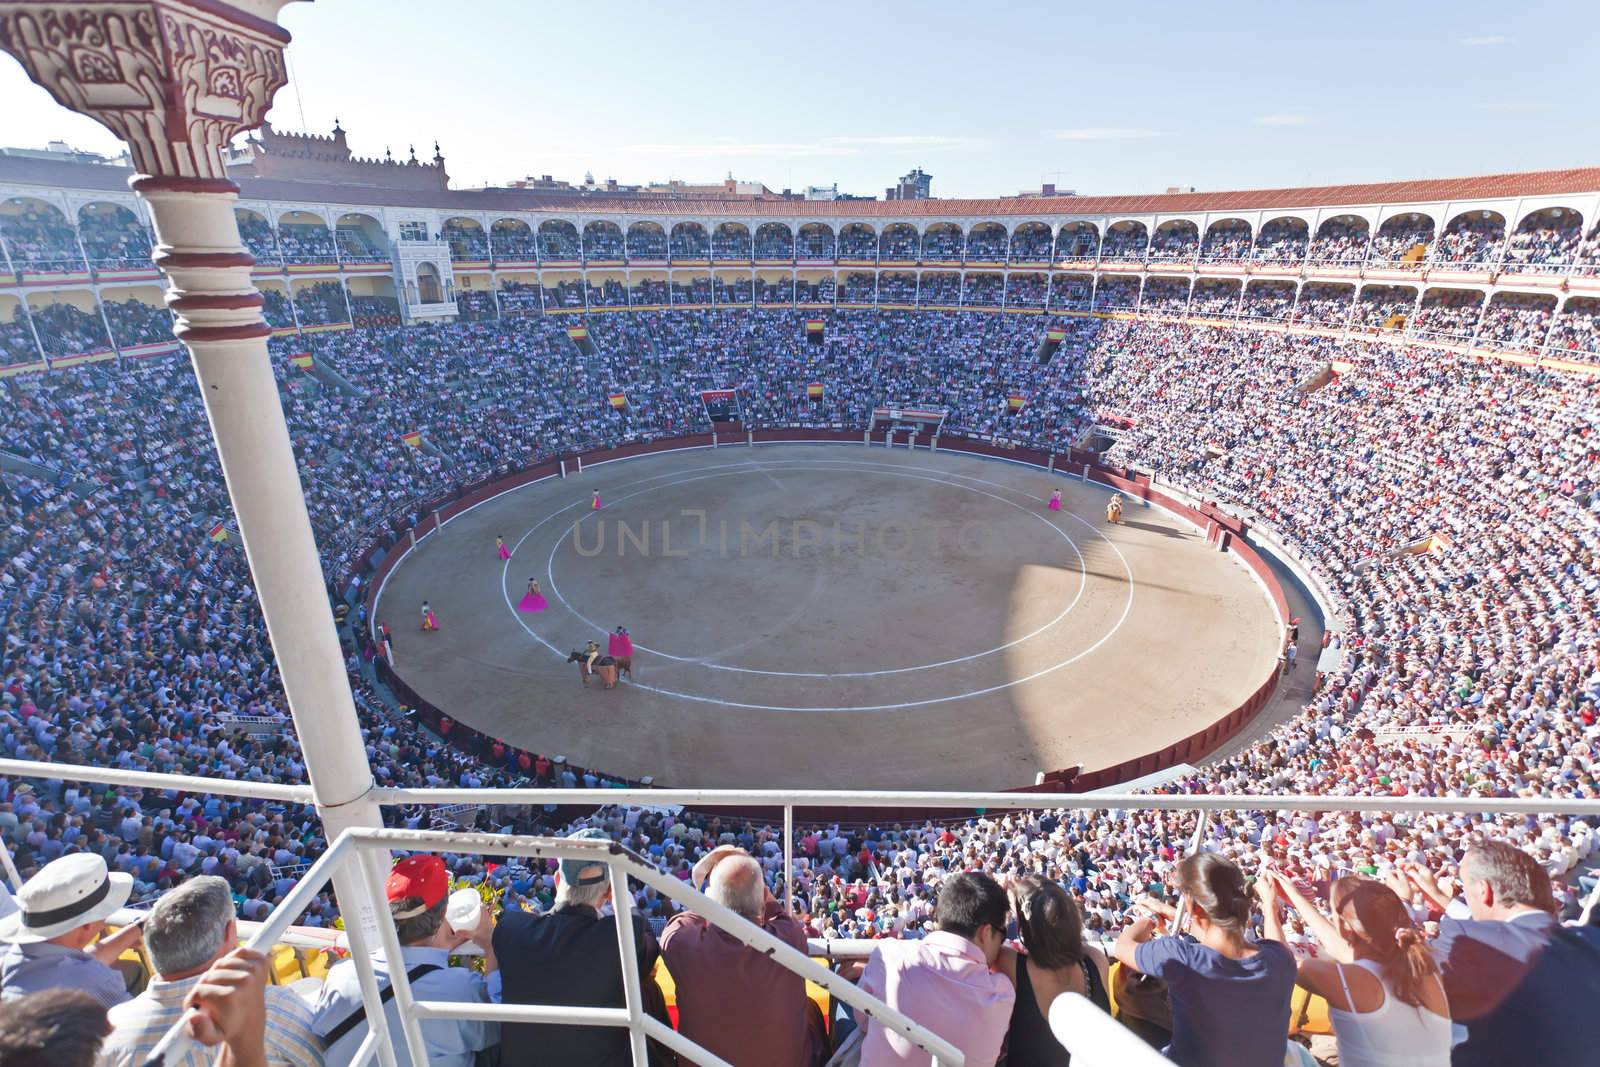 Madrid - OCTOBER 1: The huge crowd jammed in the famous Plaza de Toros are watching the bullfight on OCTOBER 1, 2010 in Madrid. Spain.